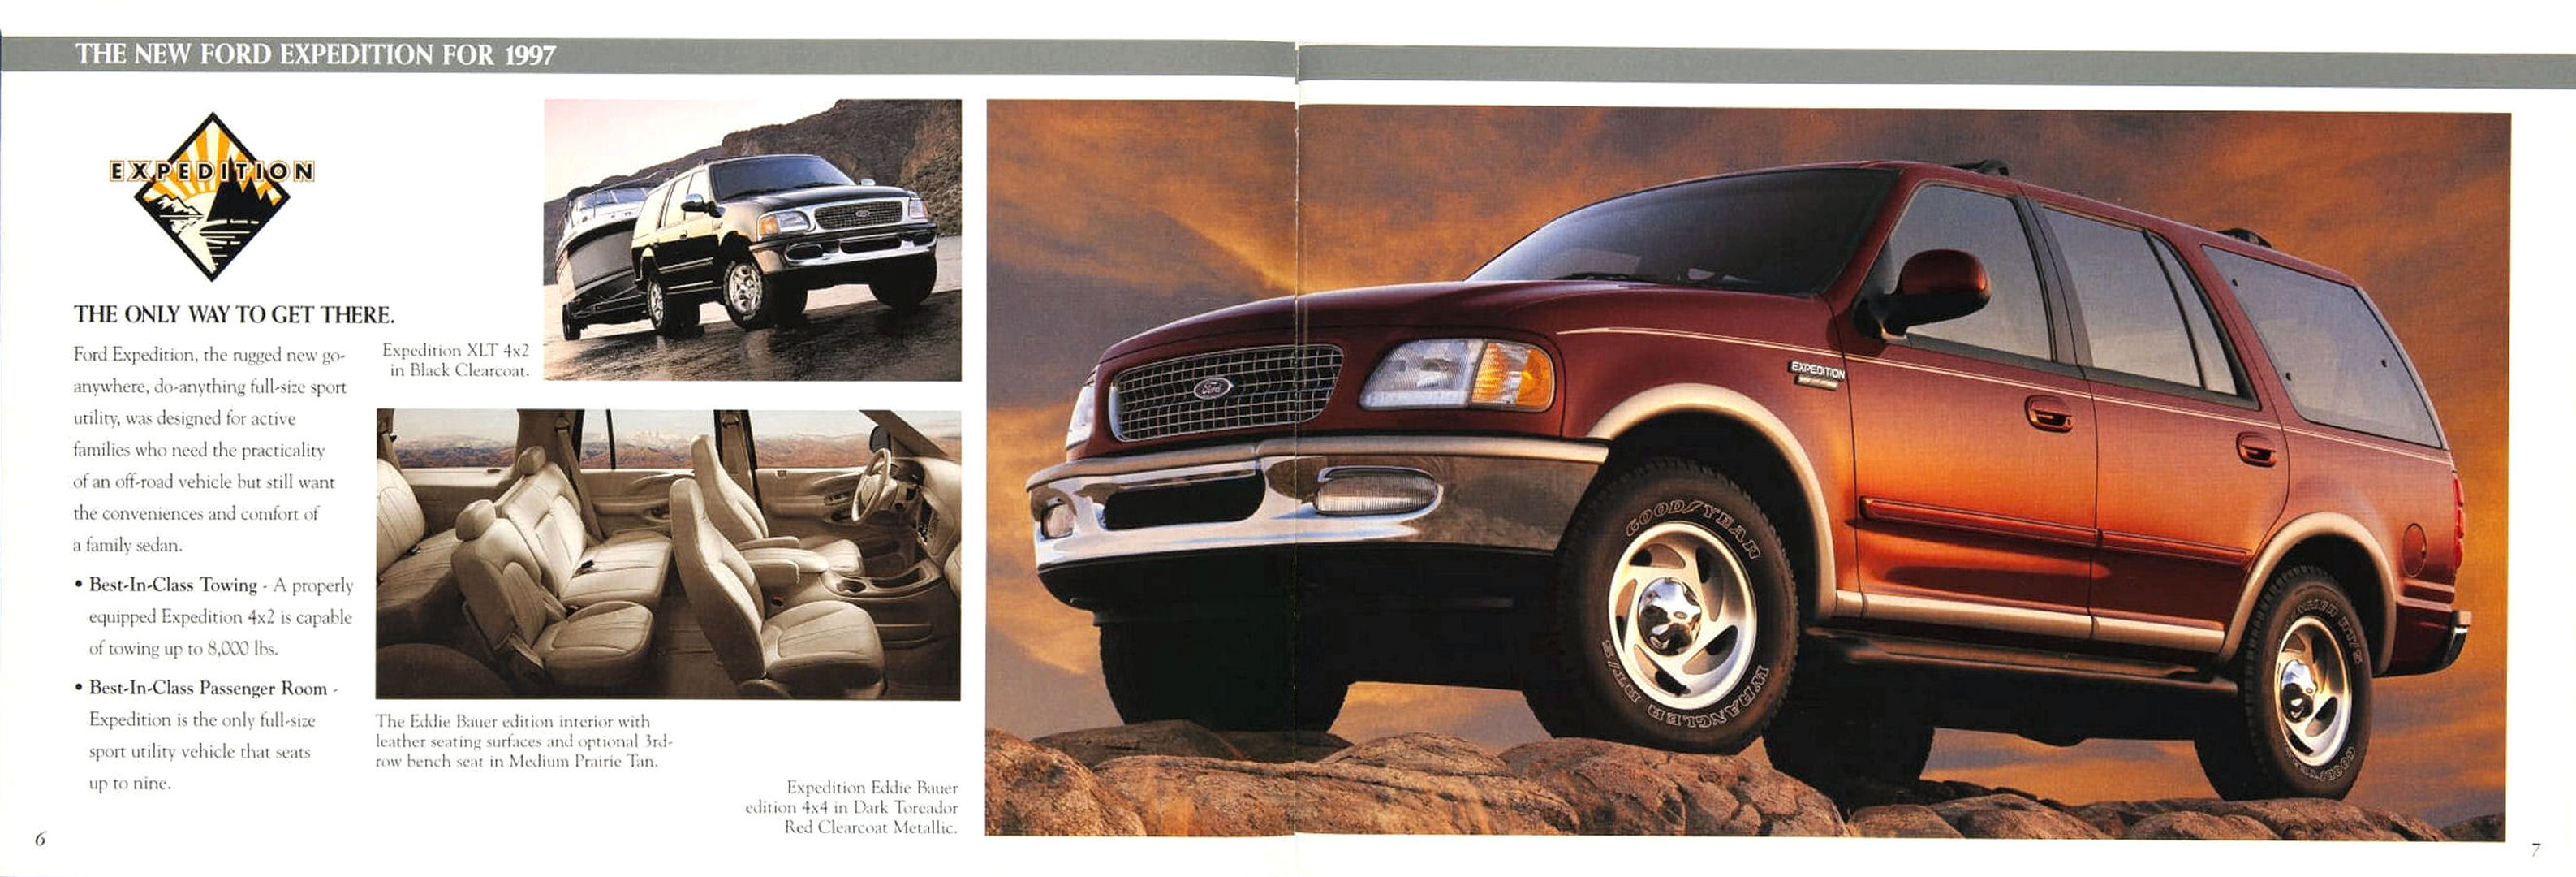 1997_Ford_Cars_and_Trucks_Rev-06-07